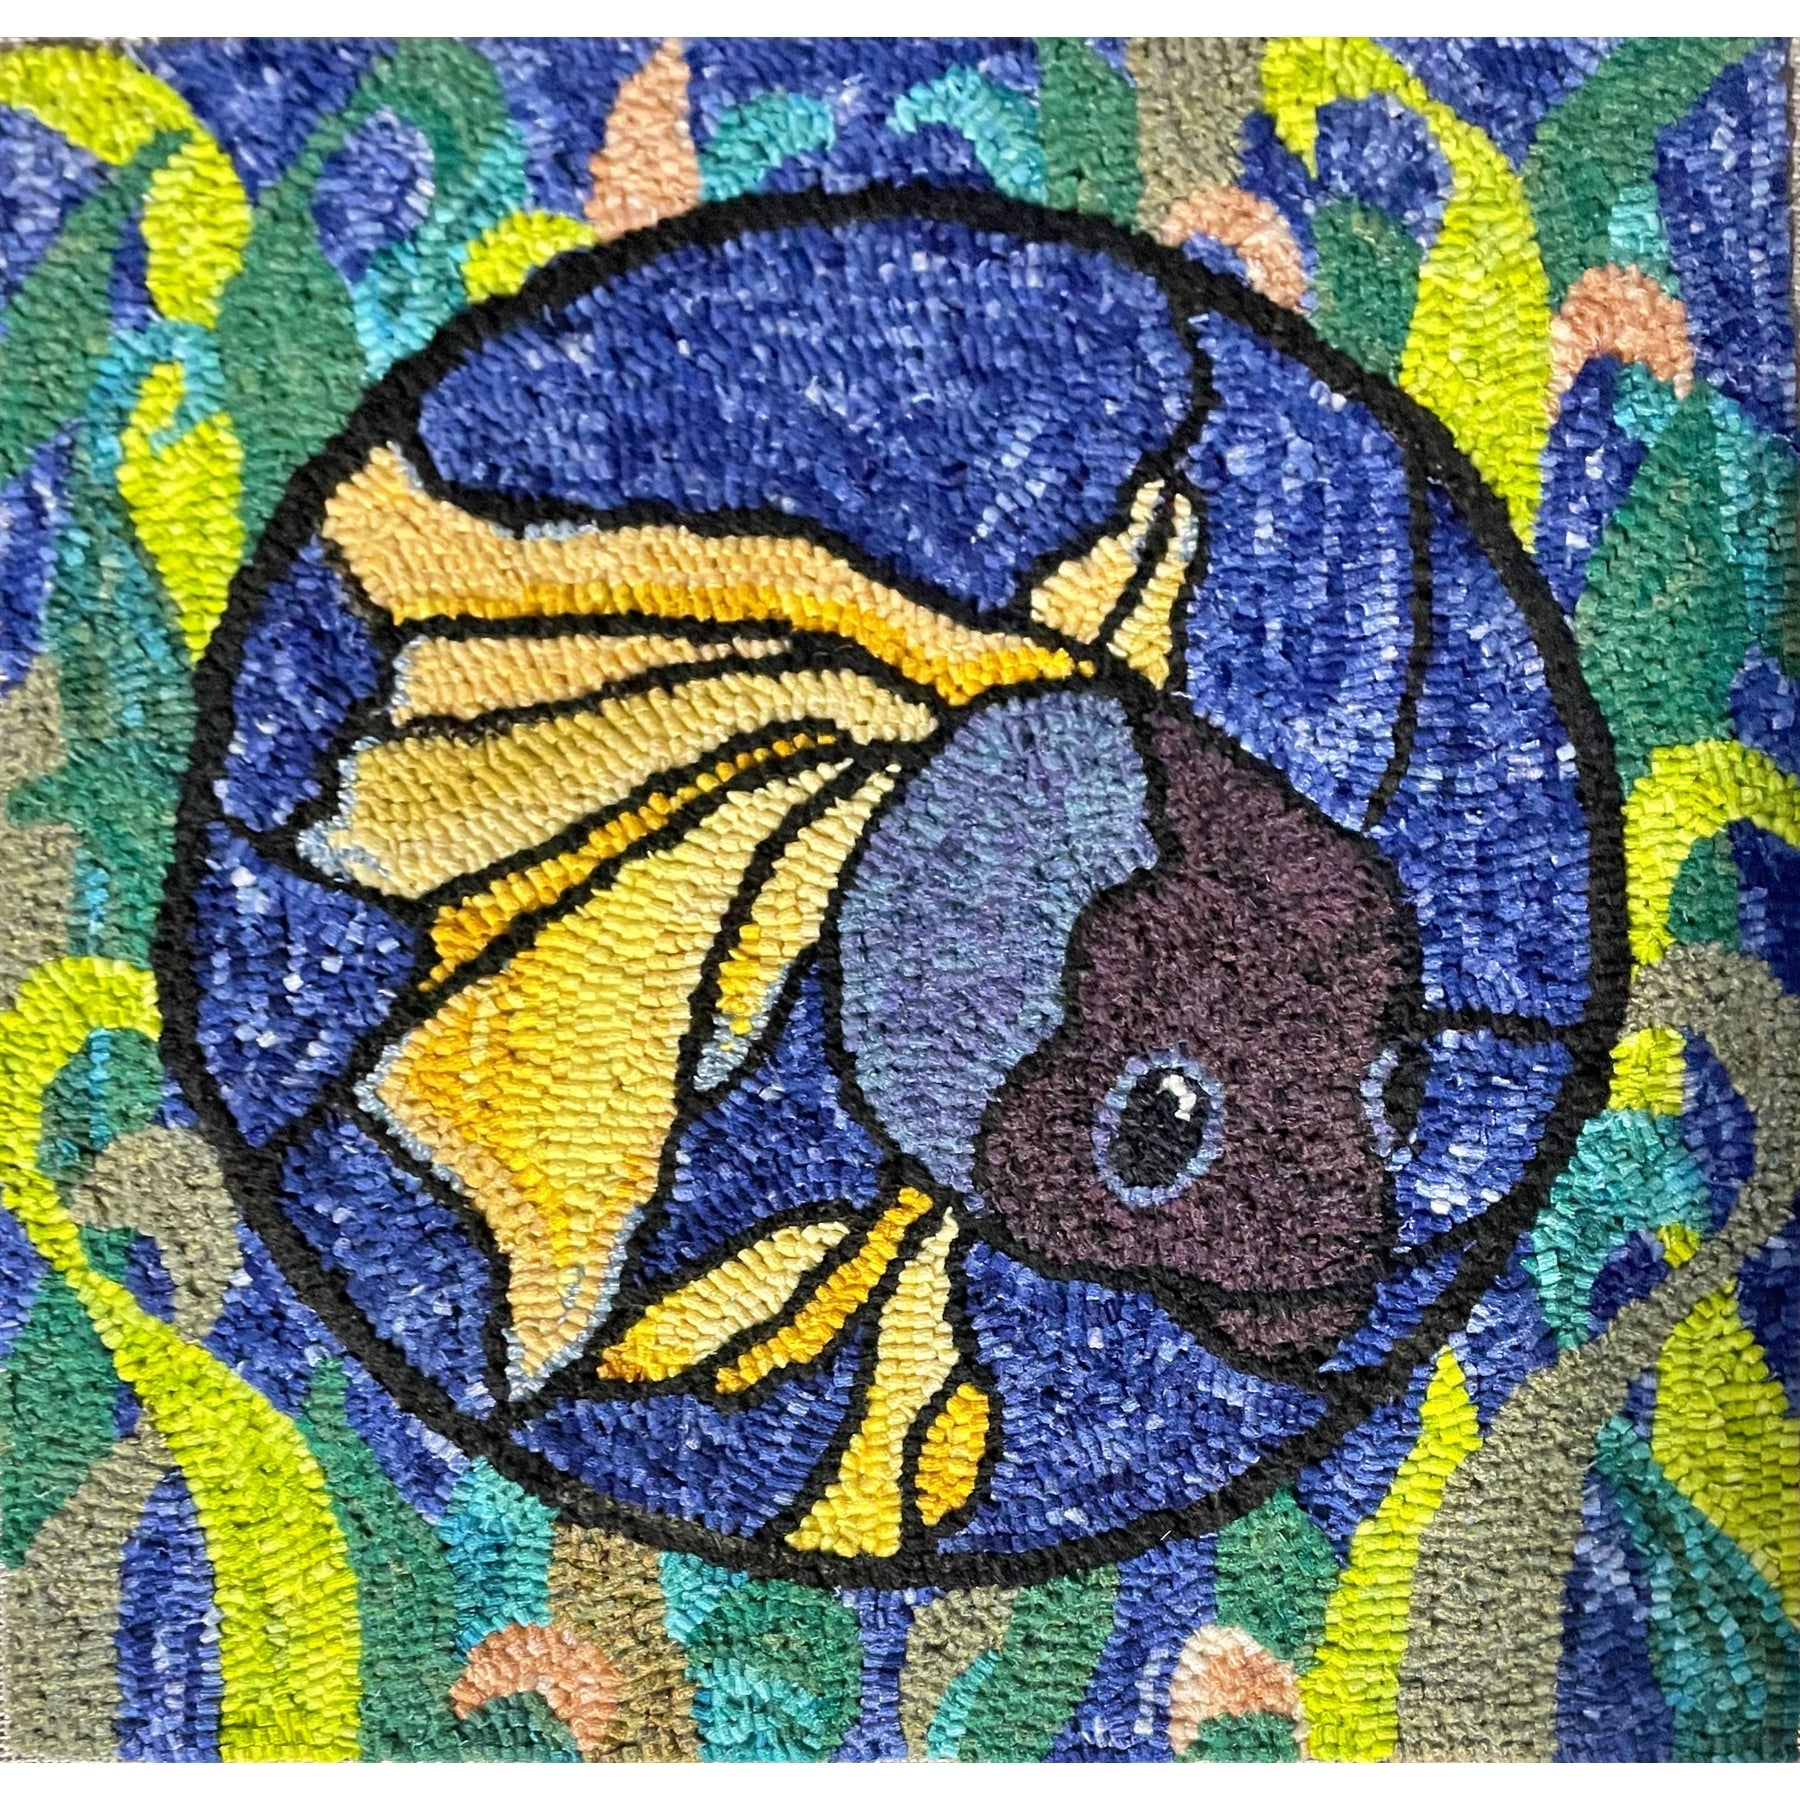 Stained Glass Fish, rug hooked by Kathleen Lynch